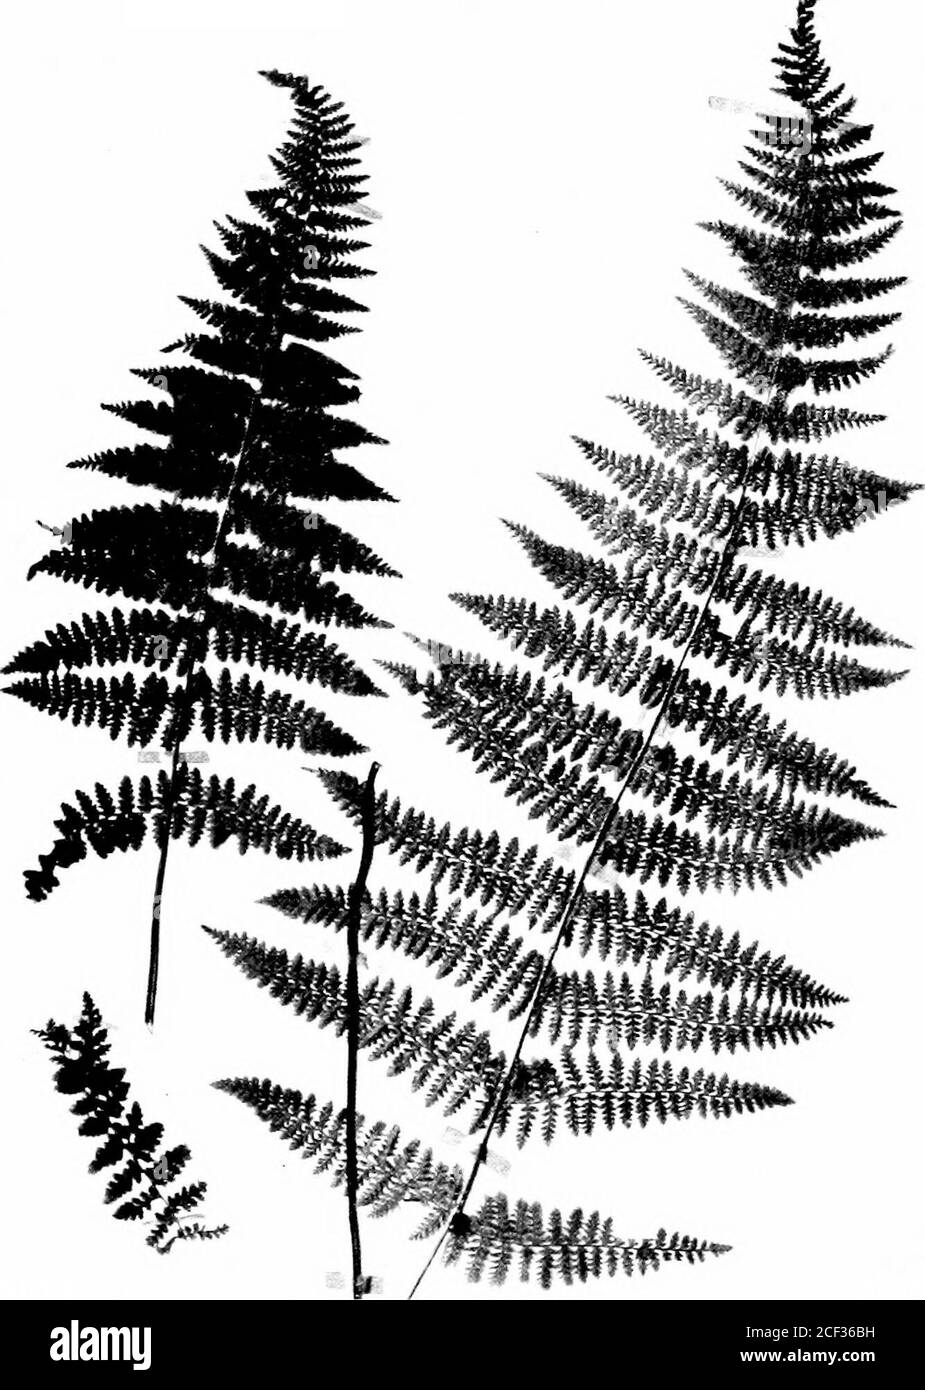 . The fern lover's companion; a guide for the Northeastern States and Canada. inia,Gaspe Peninsula, Rocky Mountains, and westward toOregon and California. (7) Cathcarts Woodsia. JJoodsia CatJicartiana Fronds eight to twelve inches high, lanceolate, bipin-natifid, finely giandular-puberulent. Pinuie oblong; thelower distant segments oblong, denticulate, separated bywide sinuses. Rocky river banks, west ^Michigan to northeast Min-nesota. Dennstaedtia. Dicl-sbiiia Fruit-dots small, globular, marginal, each on the apexof a vein or fork. Sporangia Iwrne on an elevated, globu-lar receptacle in a mem Stock Photo